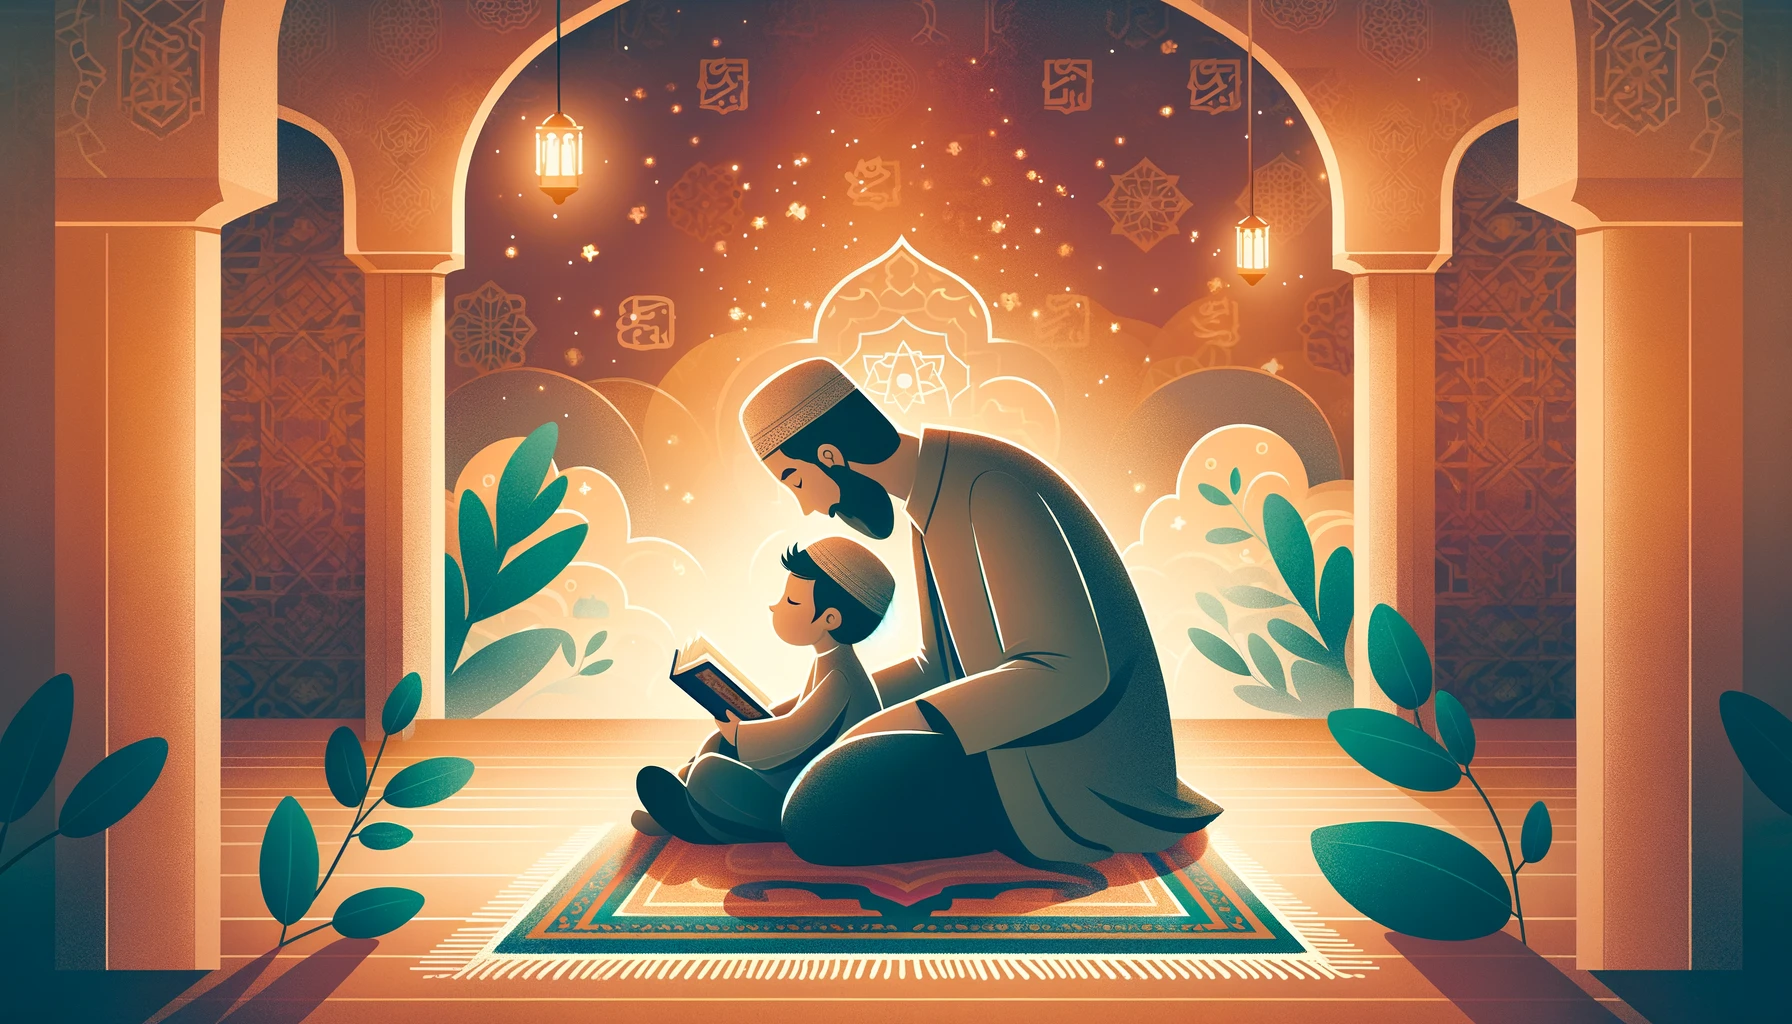 Parent and child reading together in a serene setting, surrounded by Islamic art patterns."